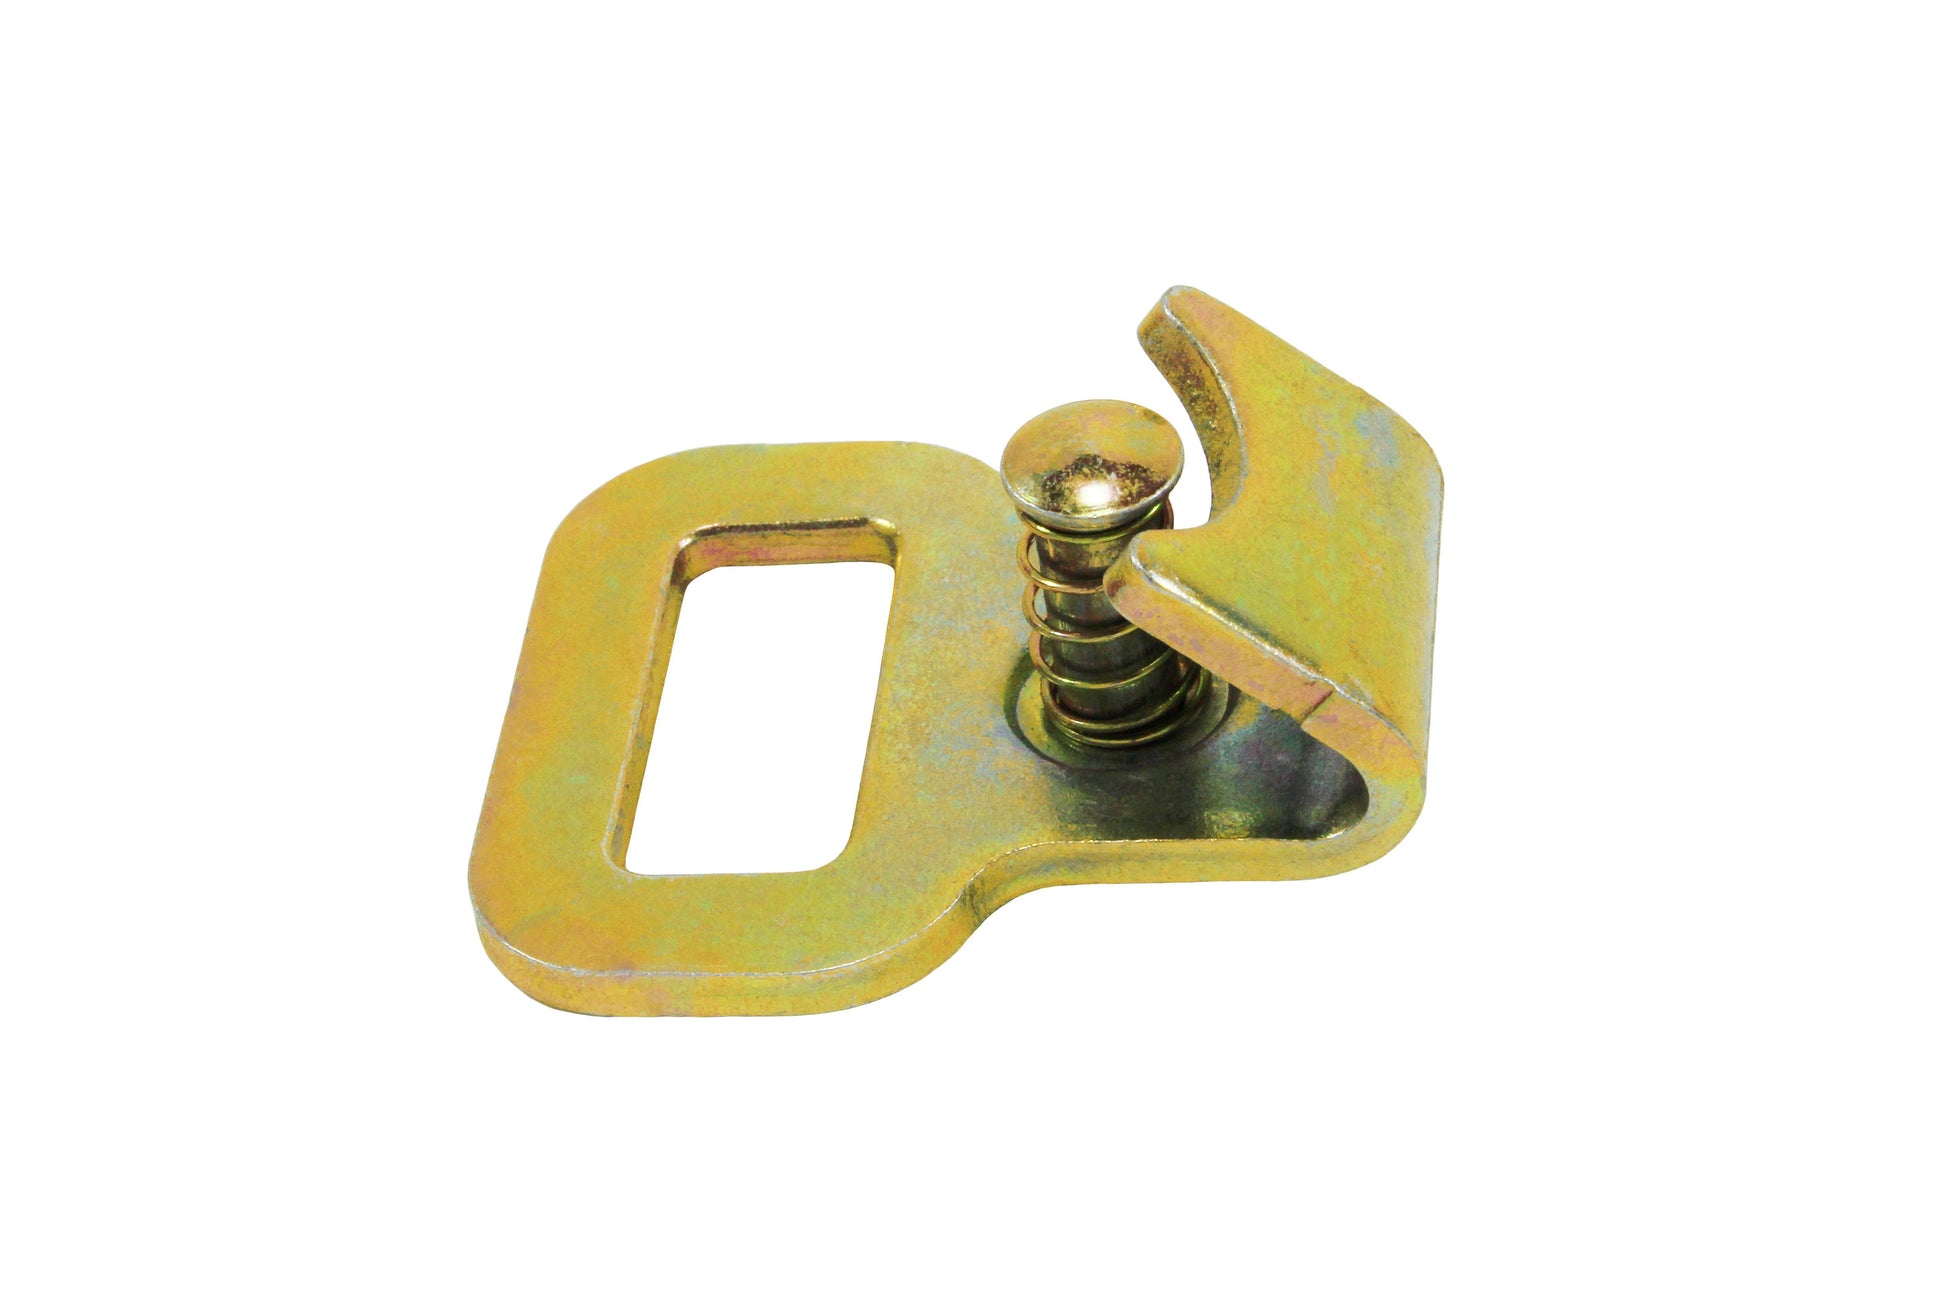 1 Inch 3,300 Ponds Hook with Spring - Boxer Tools